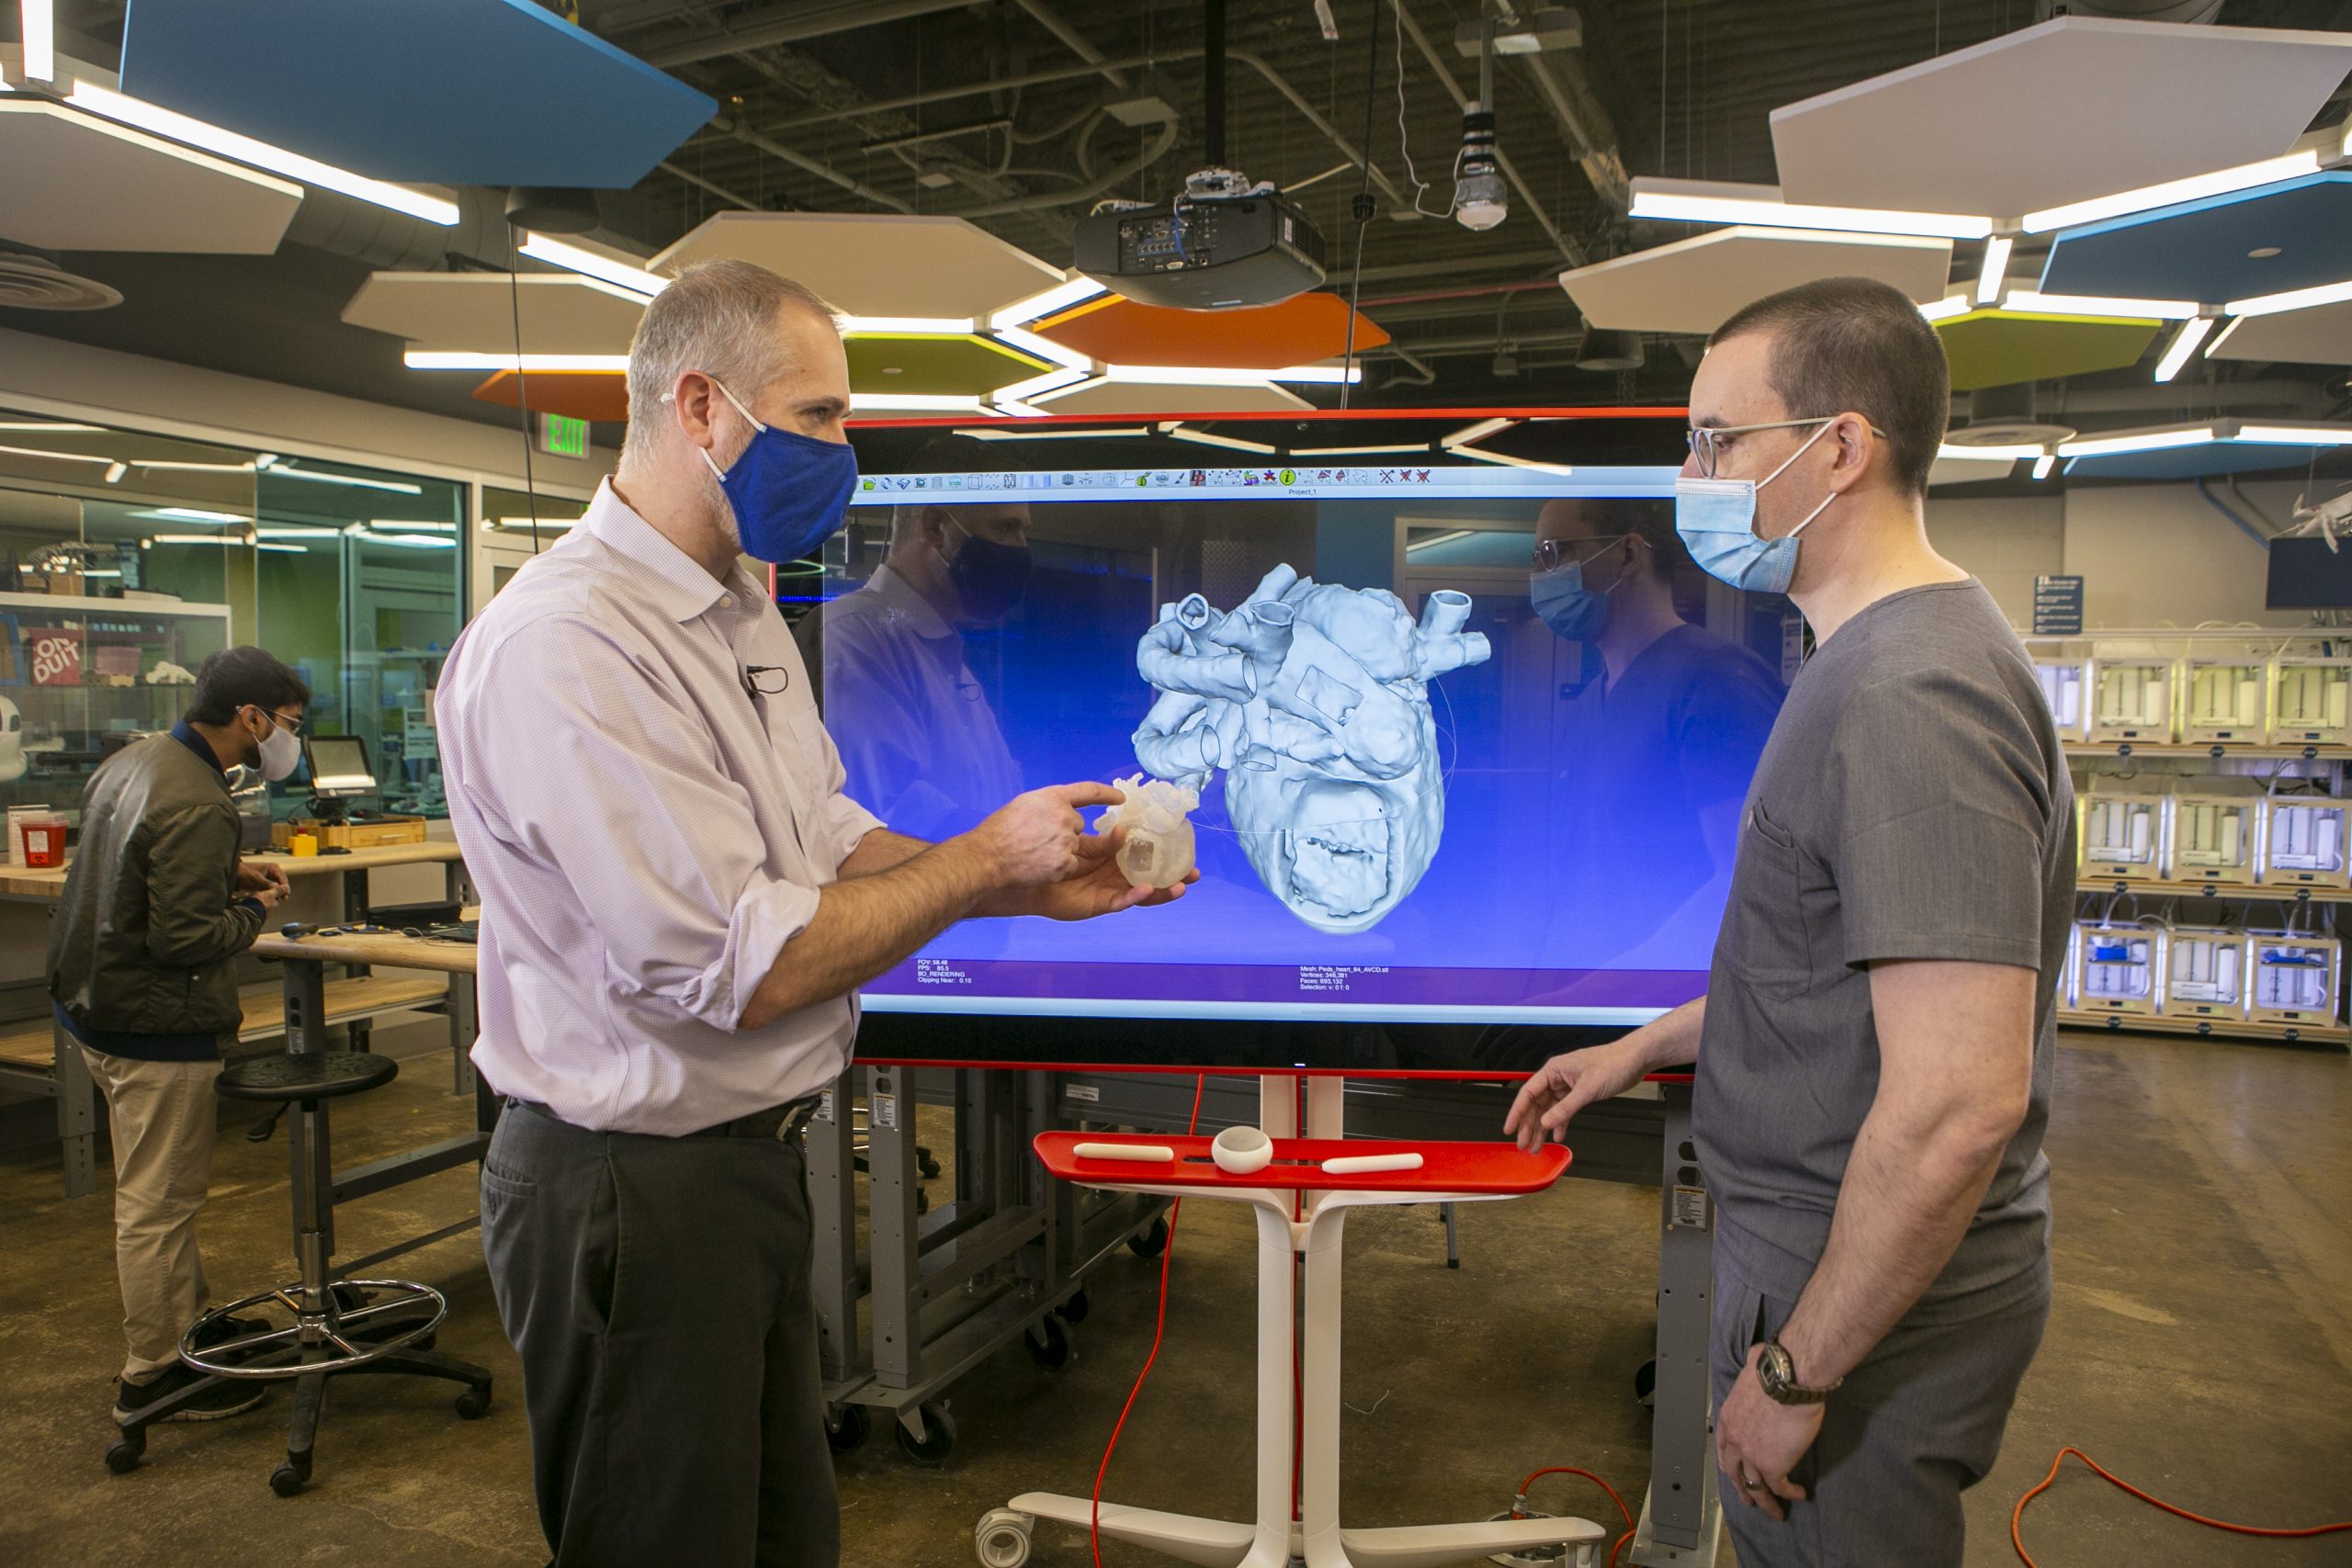 Chip Bobbert, CoLab digital fabrication architect and senior analyst, and Cardiac sonographer Gregory Sturgeon review a 3D model of a patient's heart that Duke's Innovation CoLab will print to help Duke cardiologists prepare for surgery.